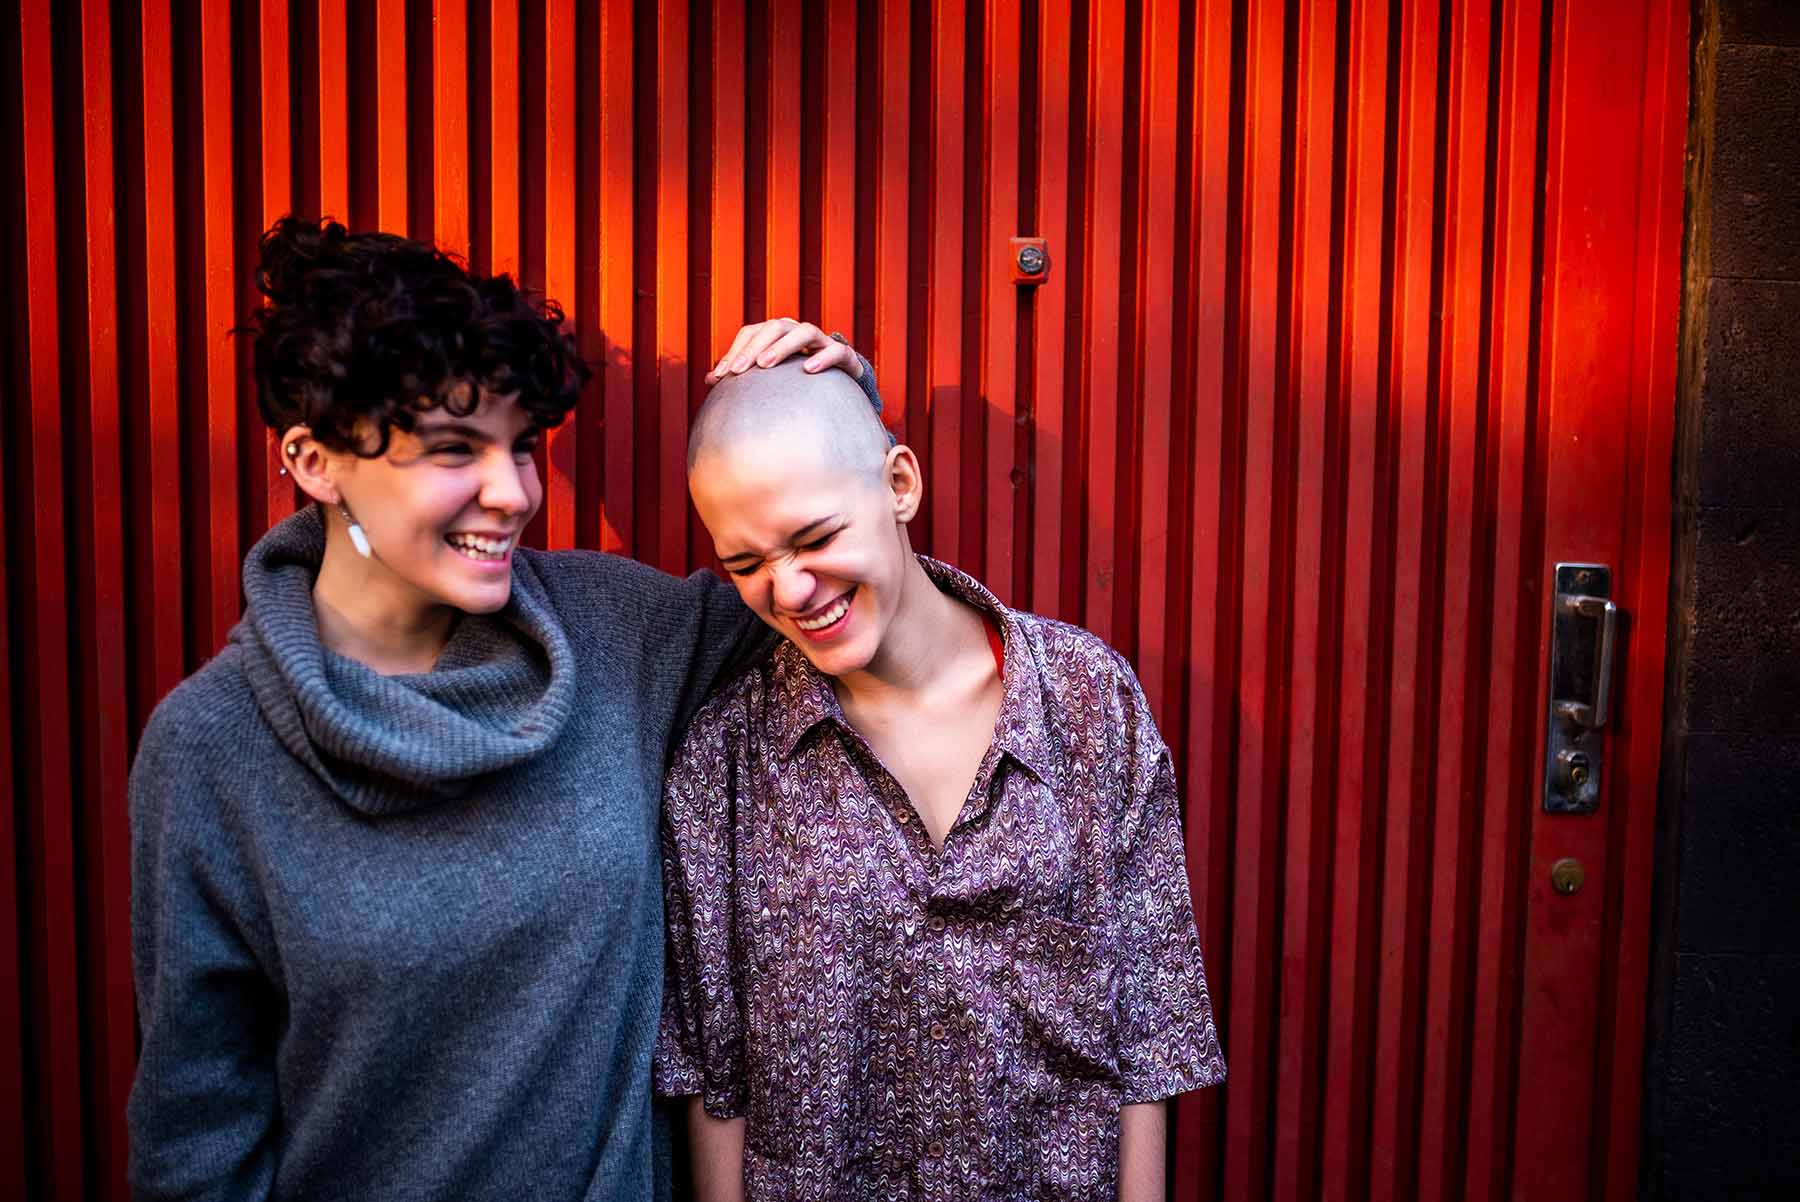 Two female friends laughing. One has cancer and smiles with her head shaved.